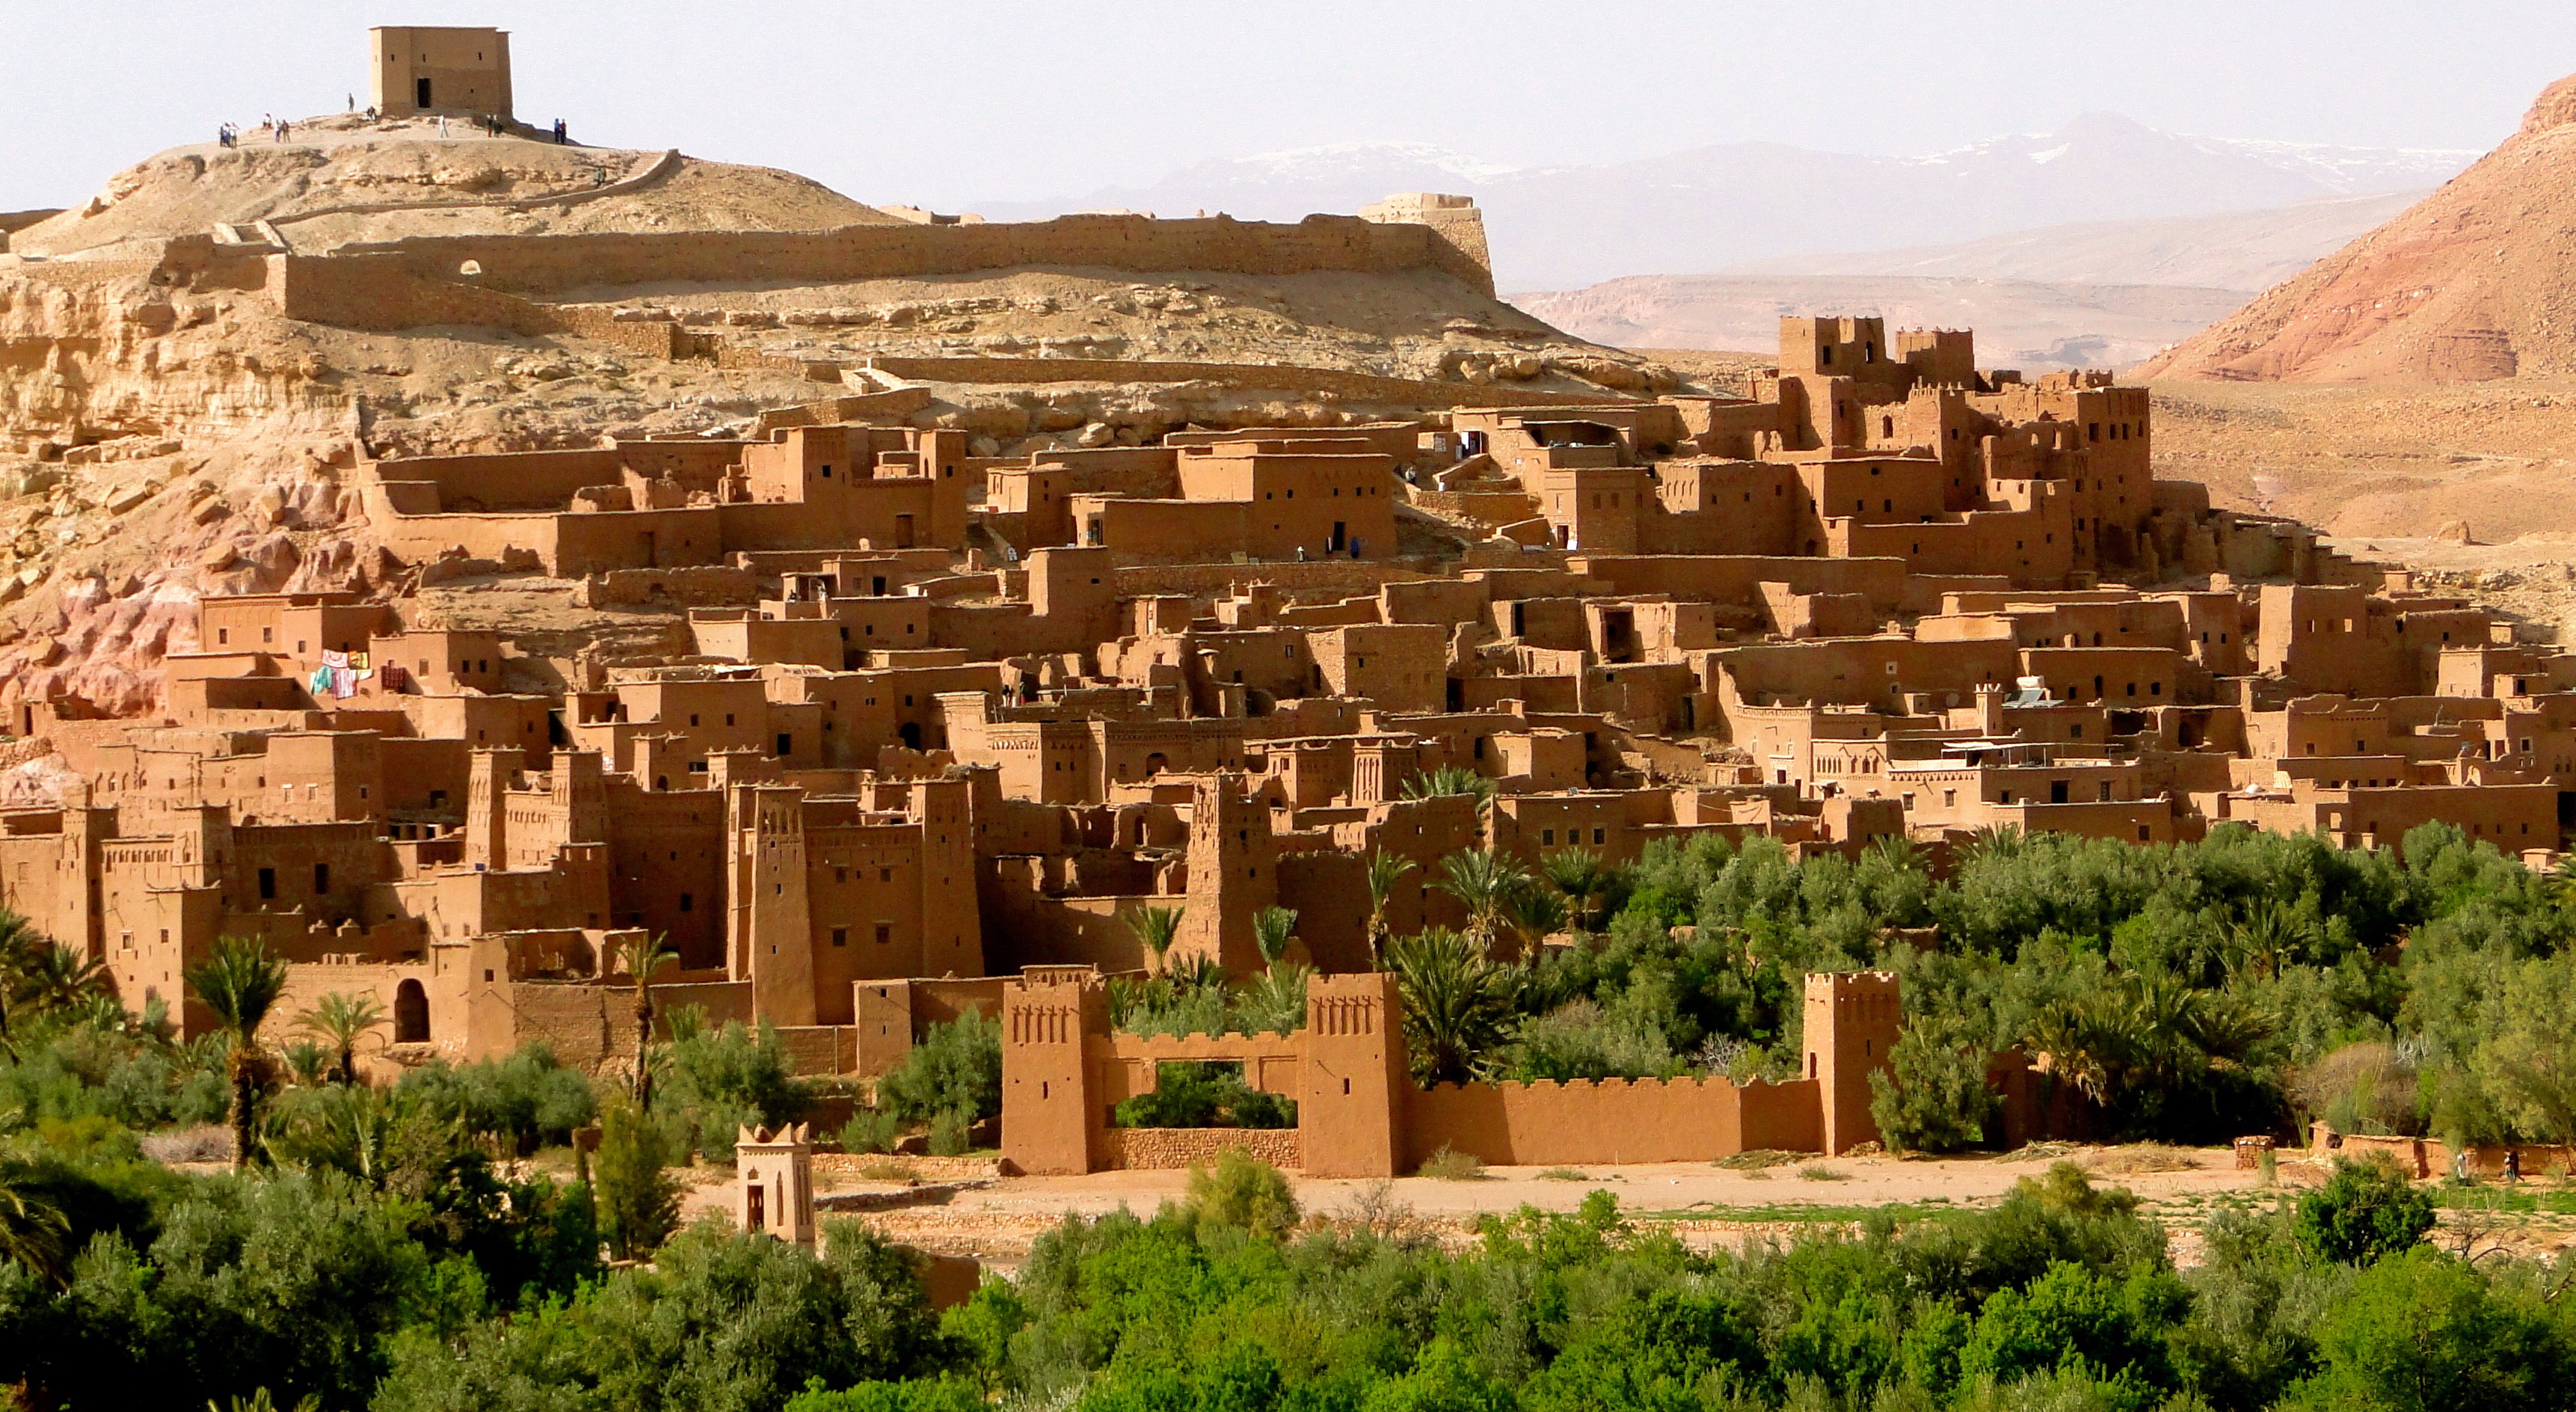 12 days travel Morocco tour from Marrakech to discover the secrets of Morocco